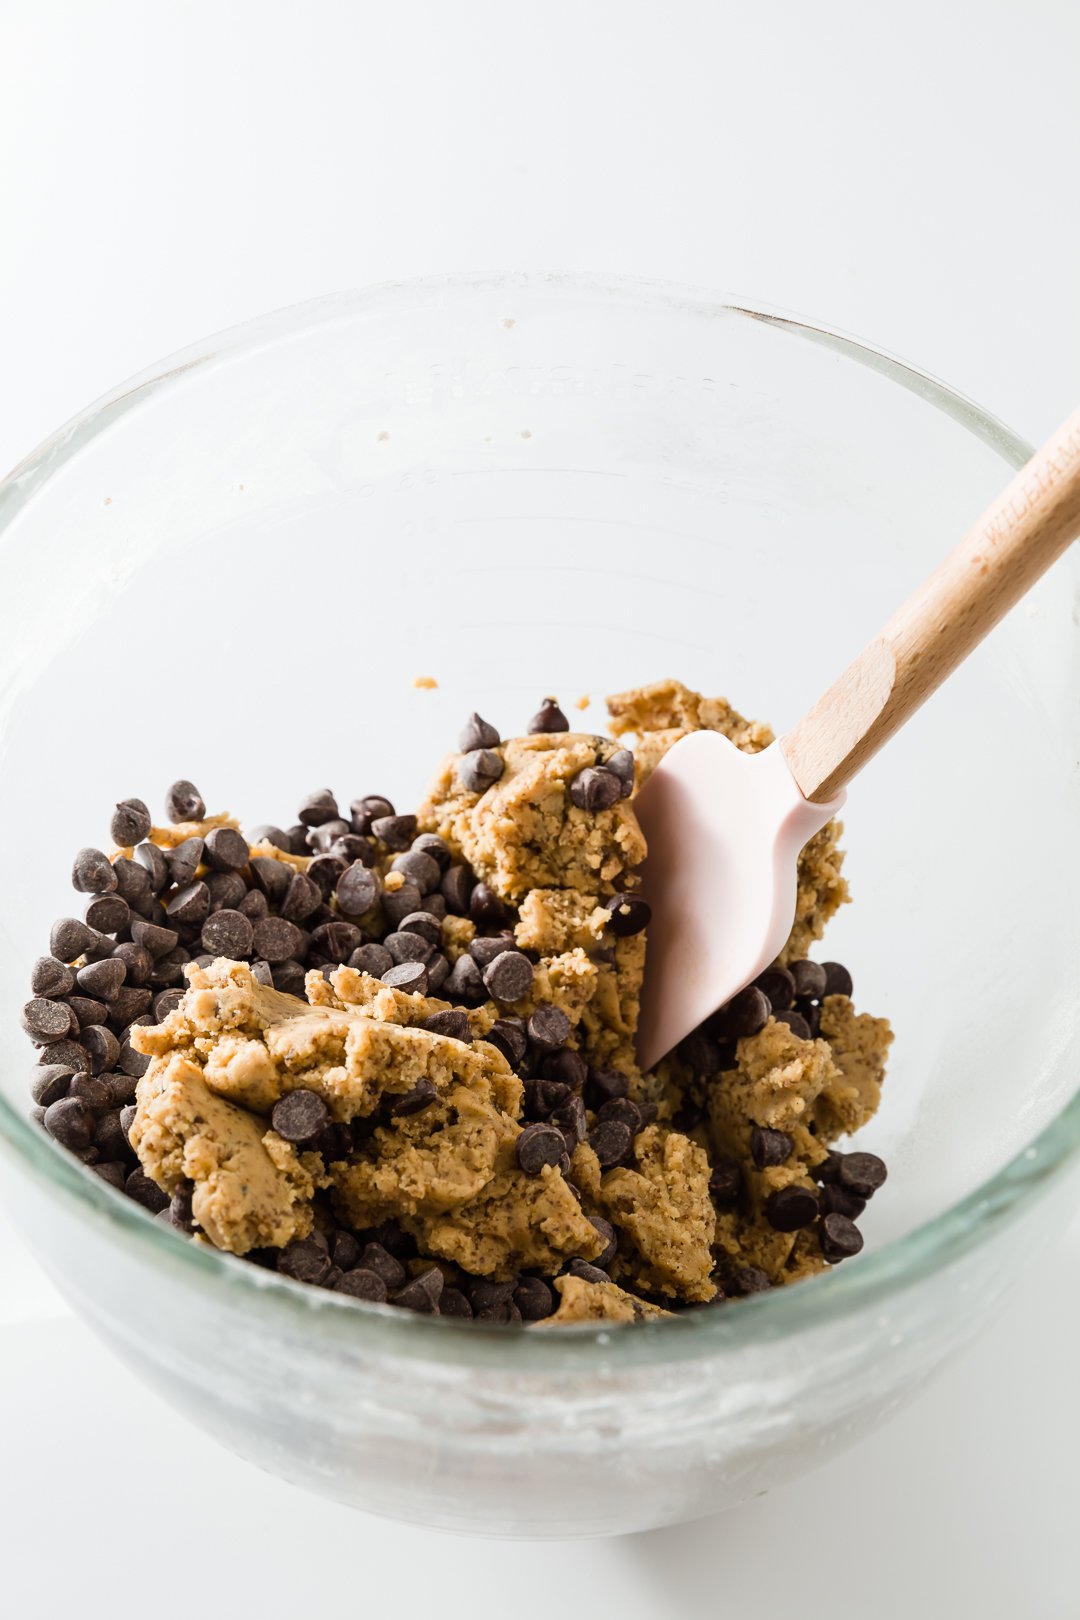 Mixing chocolate chips into cookie dough